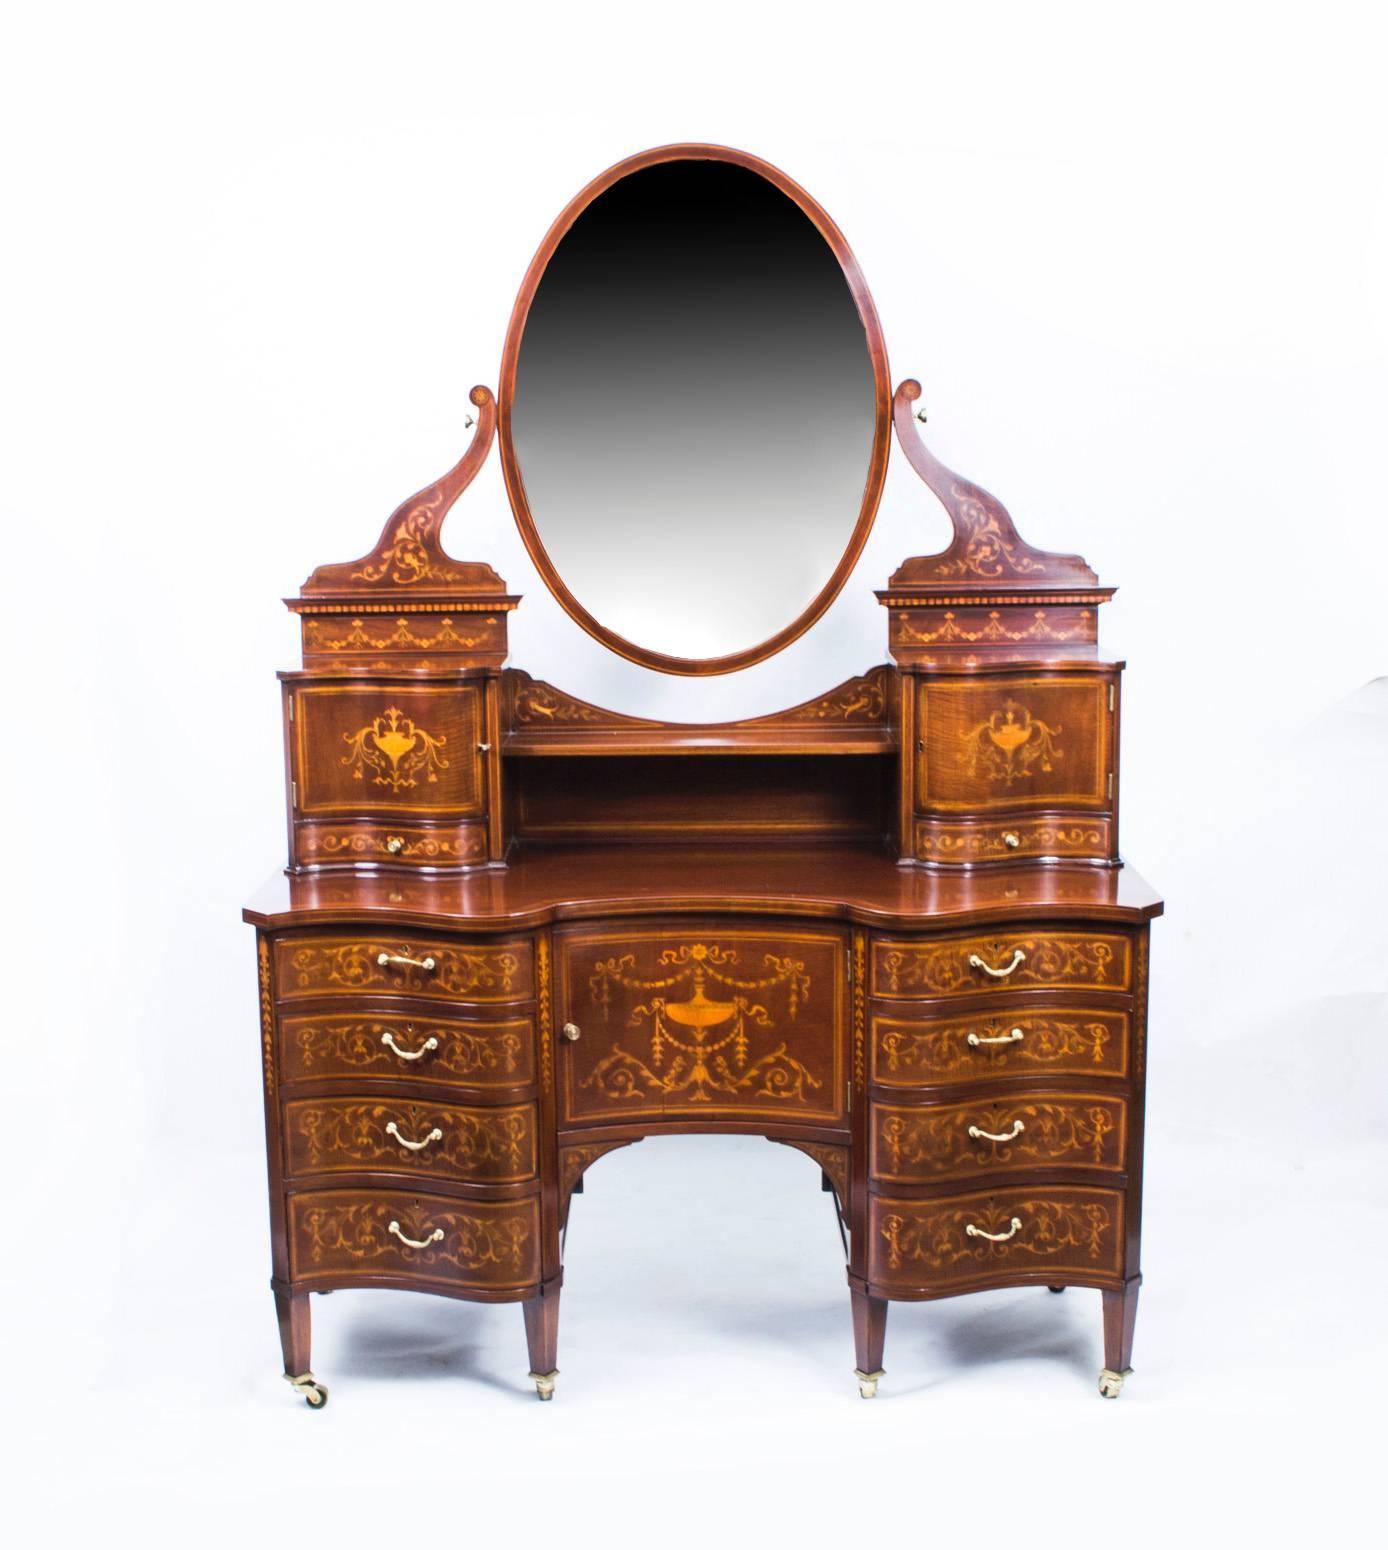 Late 19th Century Antique Victorian Bedroom Suite by Edwards & Roberts, circa 1880